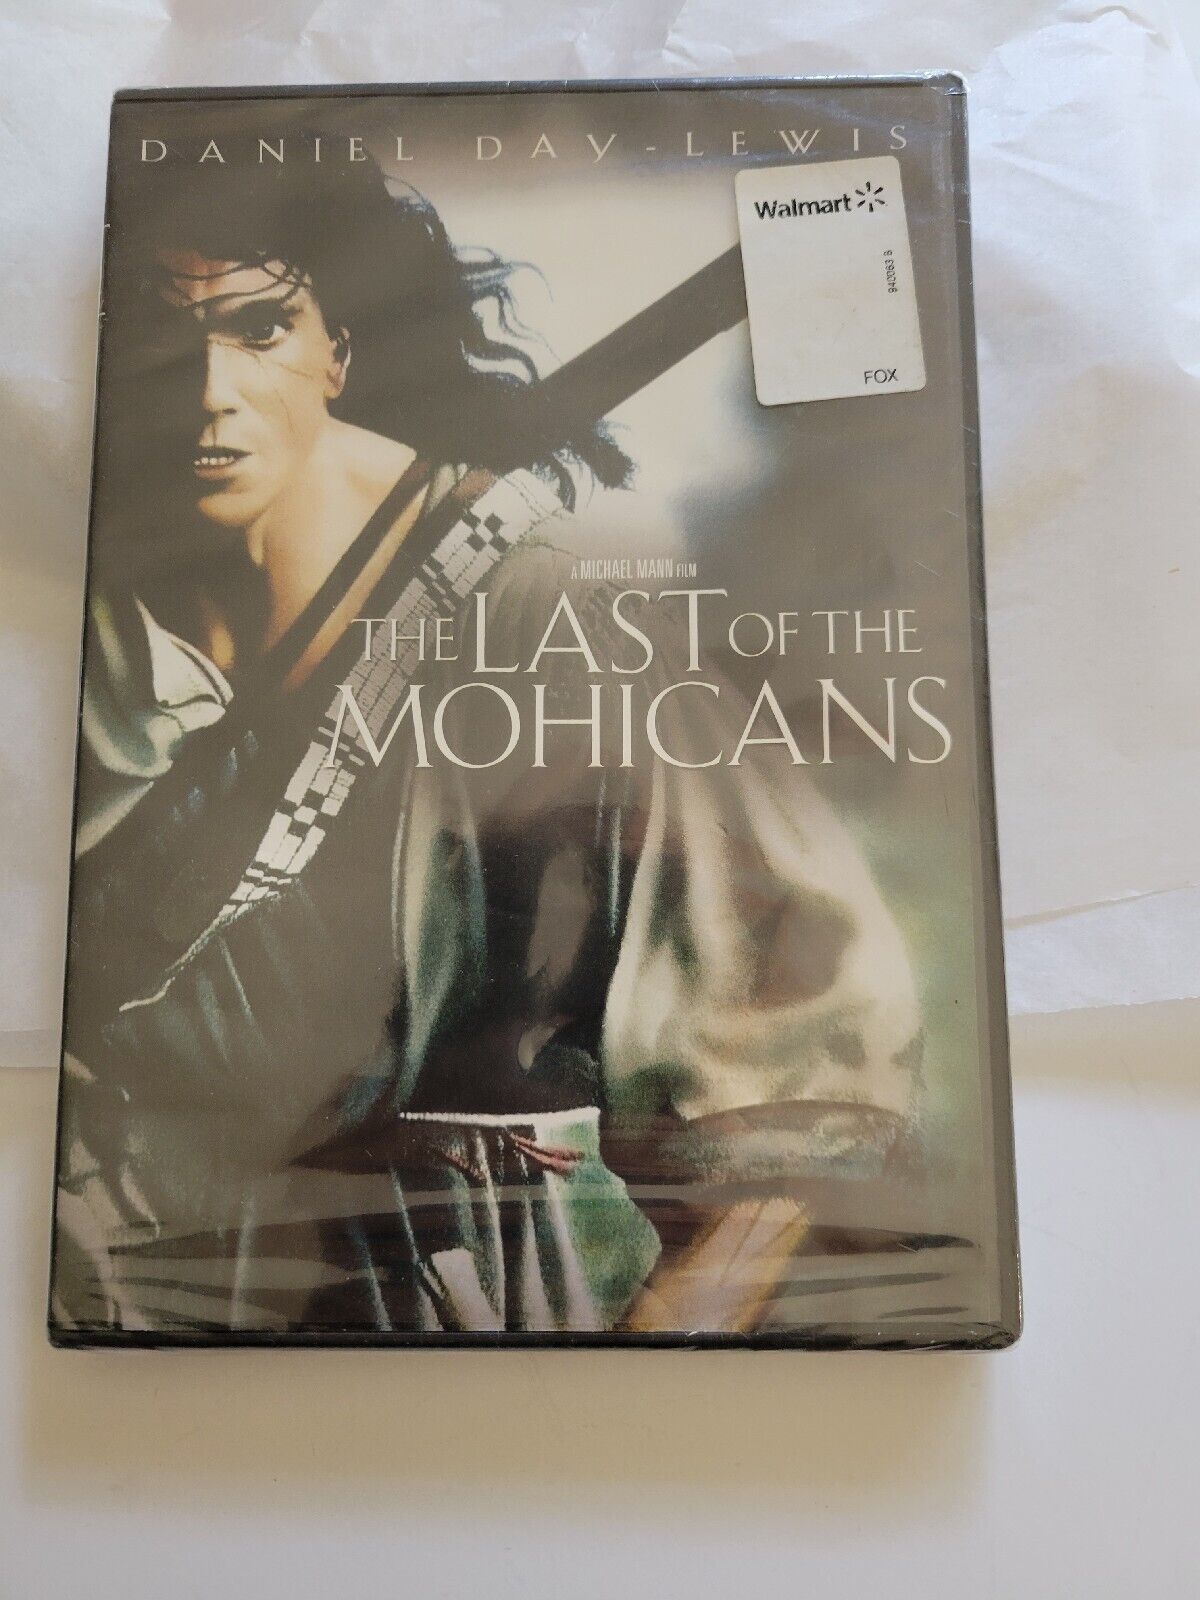 The Last of the Mohicans (DVD, 2010 20th Century Fox)